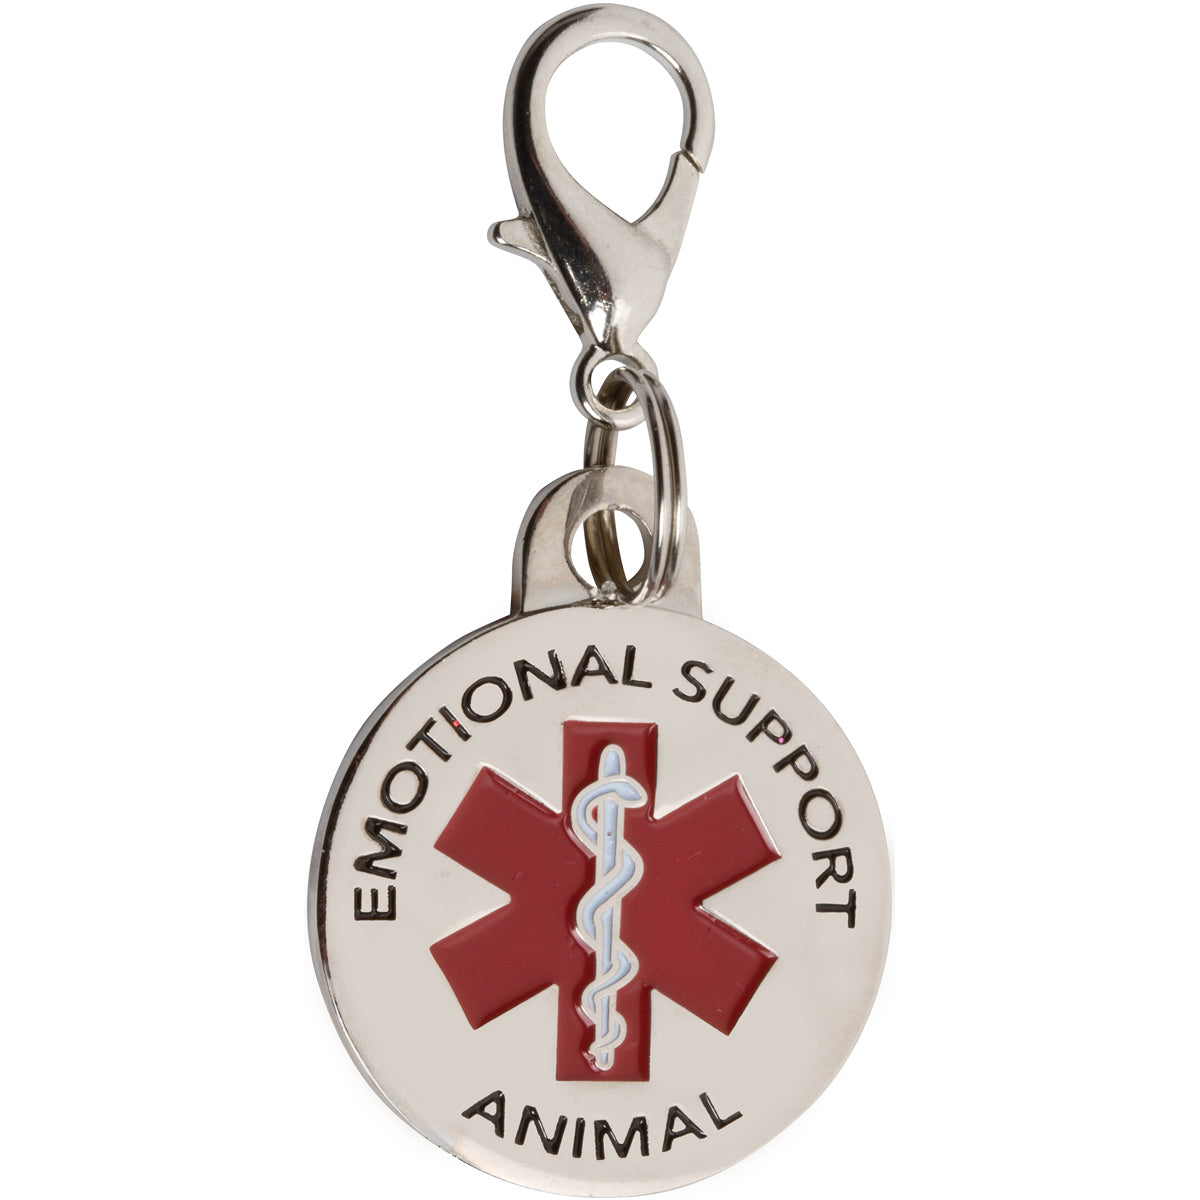 K9King Emotional Support Animal (ESA) Tag Double Sided Red Medical Alert Symbol 1.25" inches. Easily Switch Between Collars Harness and Vest. - K9King